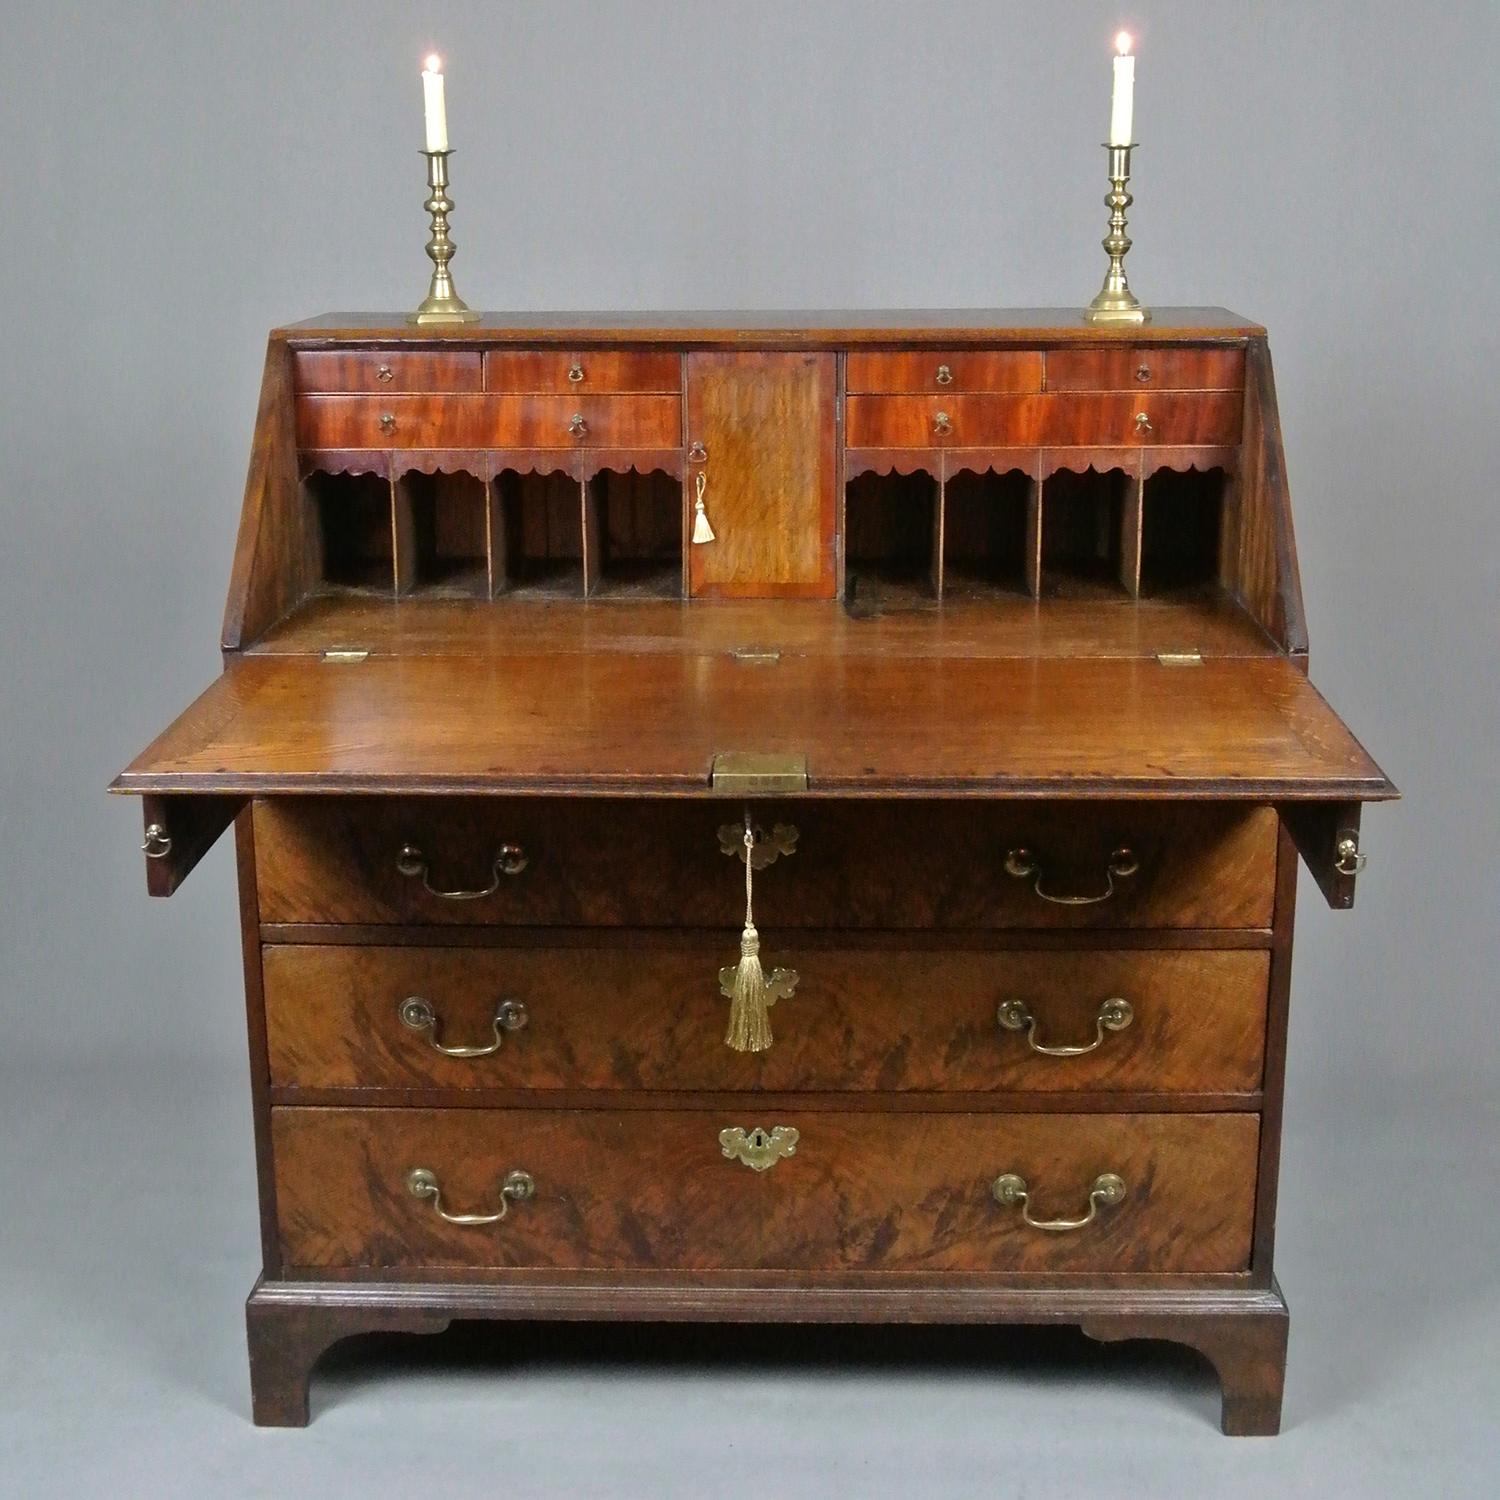 A very good and rarely seen figured elm bureau with a fine interior of padouk faced drawers with brass drop handles and an oak central door, crossbanded in padauk, with original lock and working key and opening to reveal a secret padauk fronted